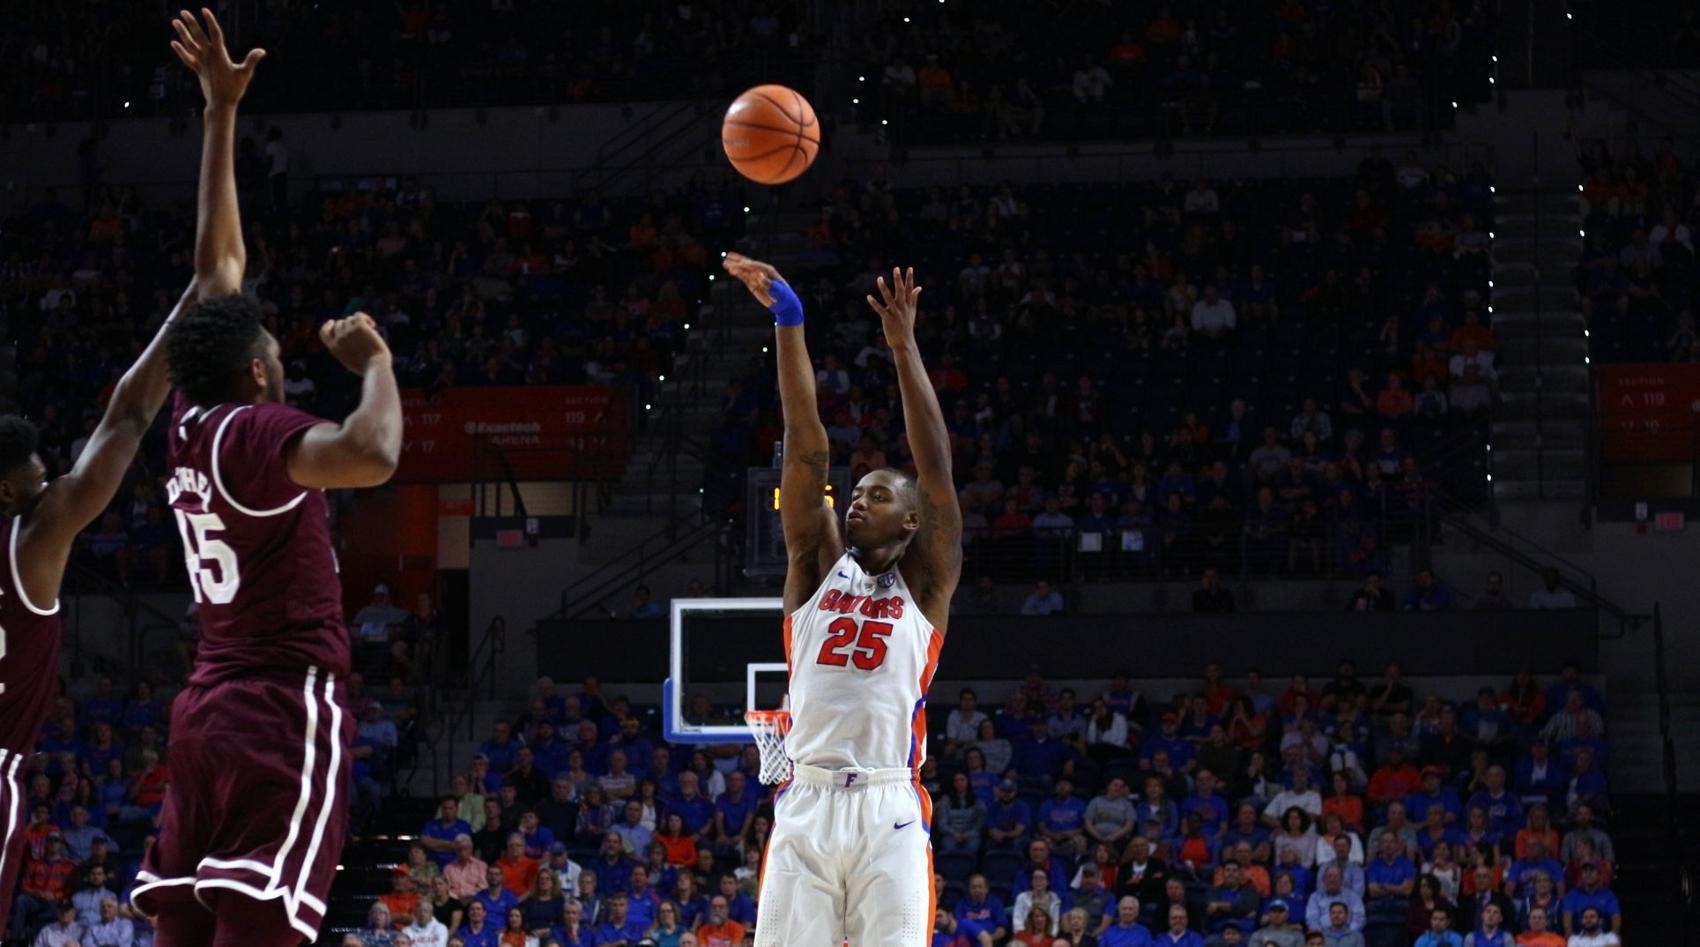 florida-routs-butler-in-rematch